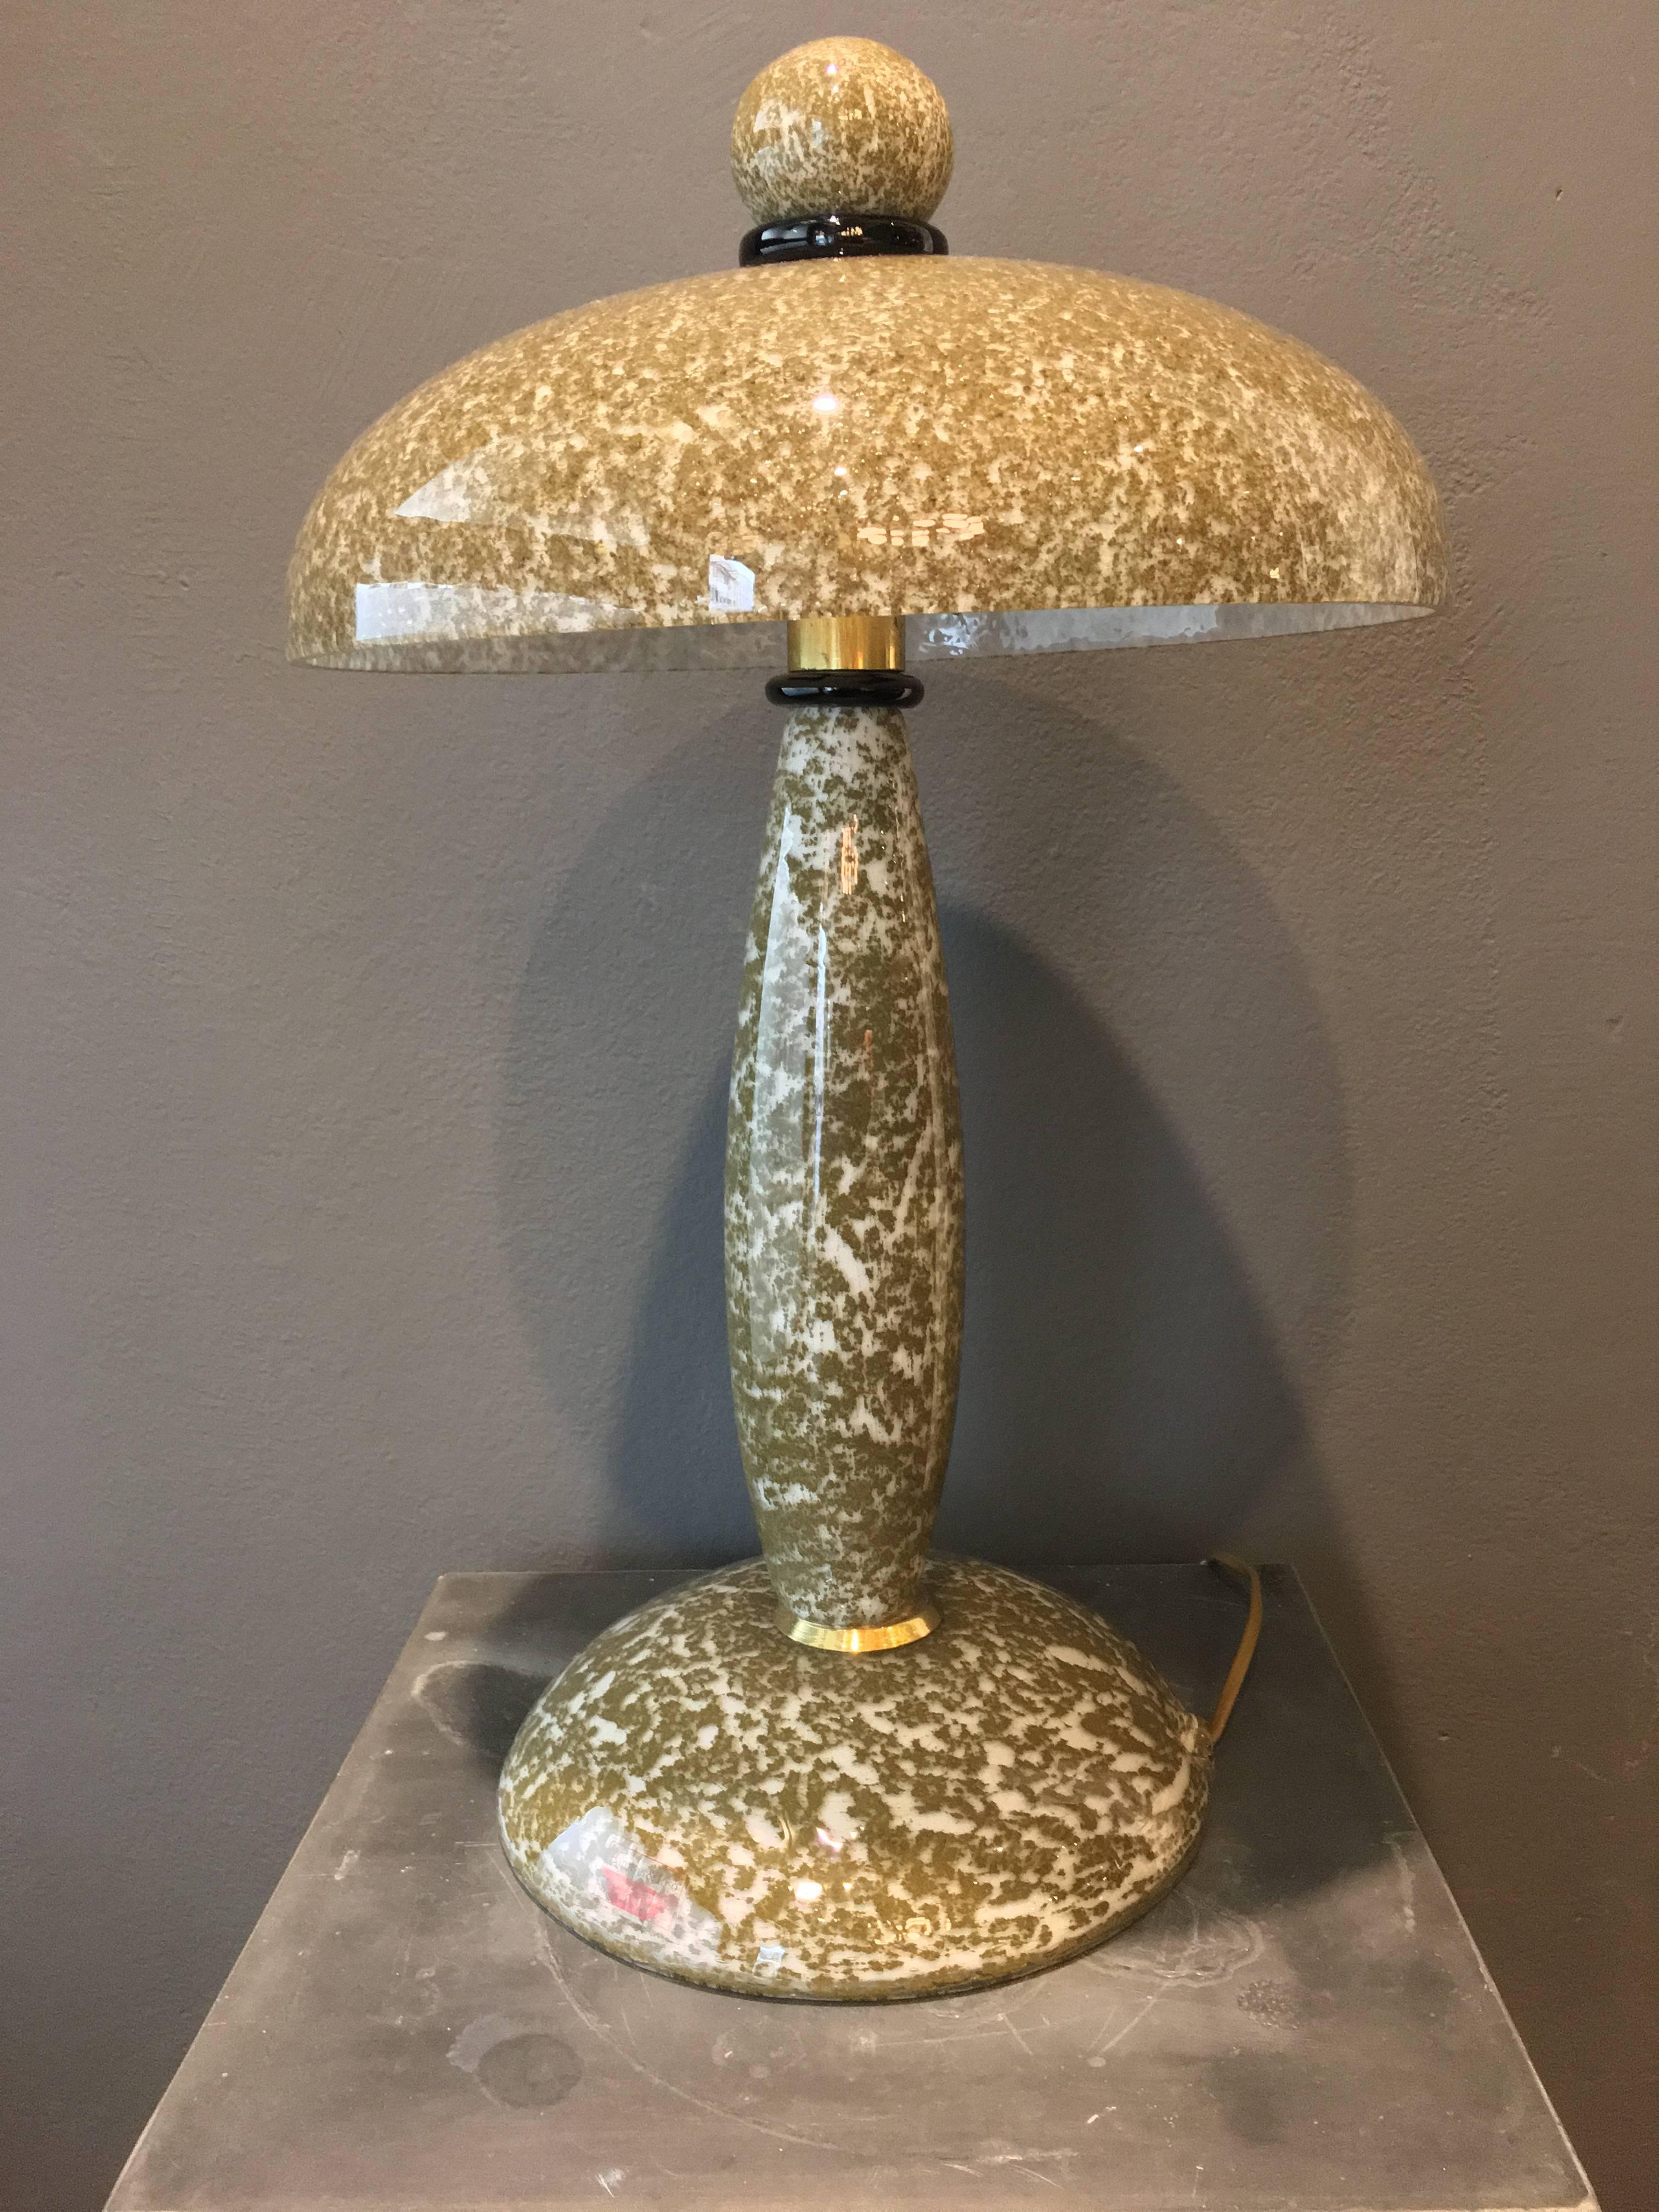 Amazing vintage table lamp
Blown glass and brass
Spotted and black parts
Original label Barovier and Toso
Murano-Venice
Made in Italy
1970 period
Measures: H 53, D 33 cm.